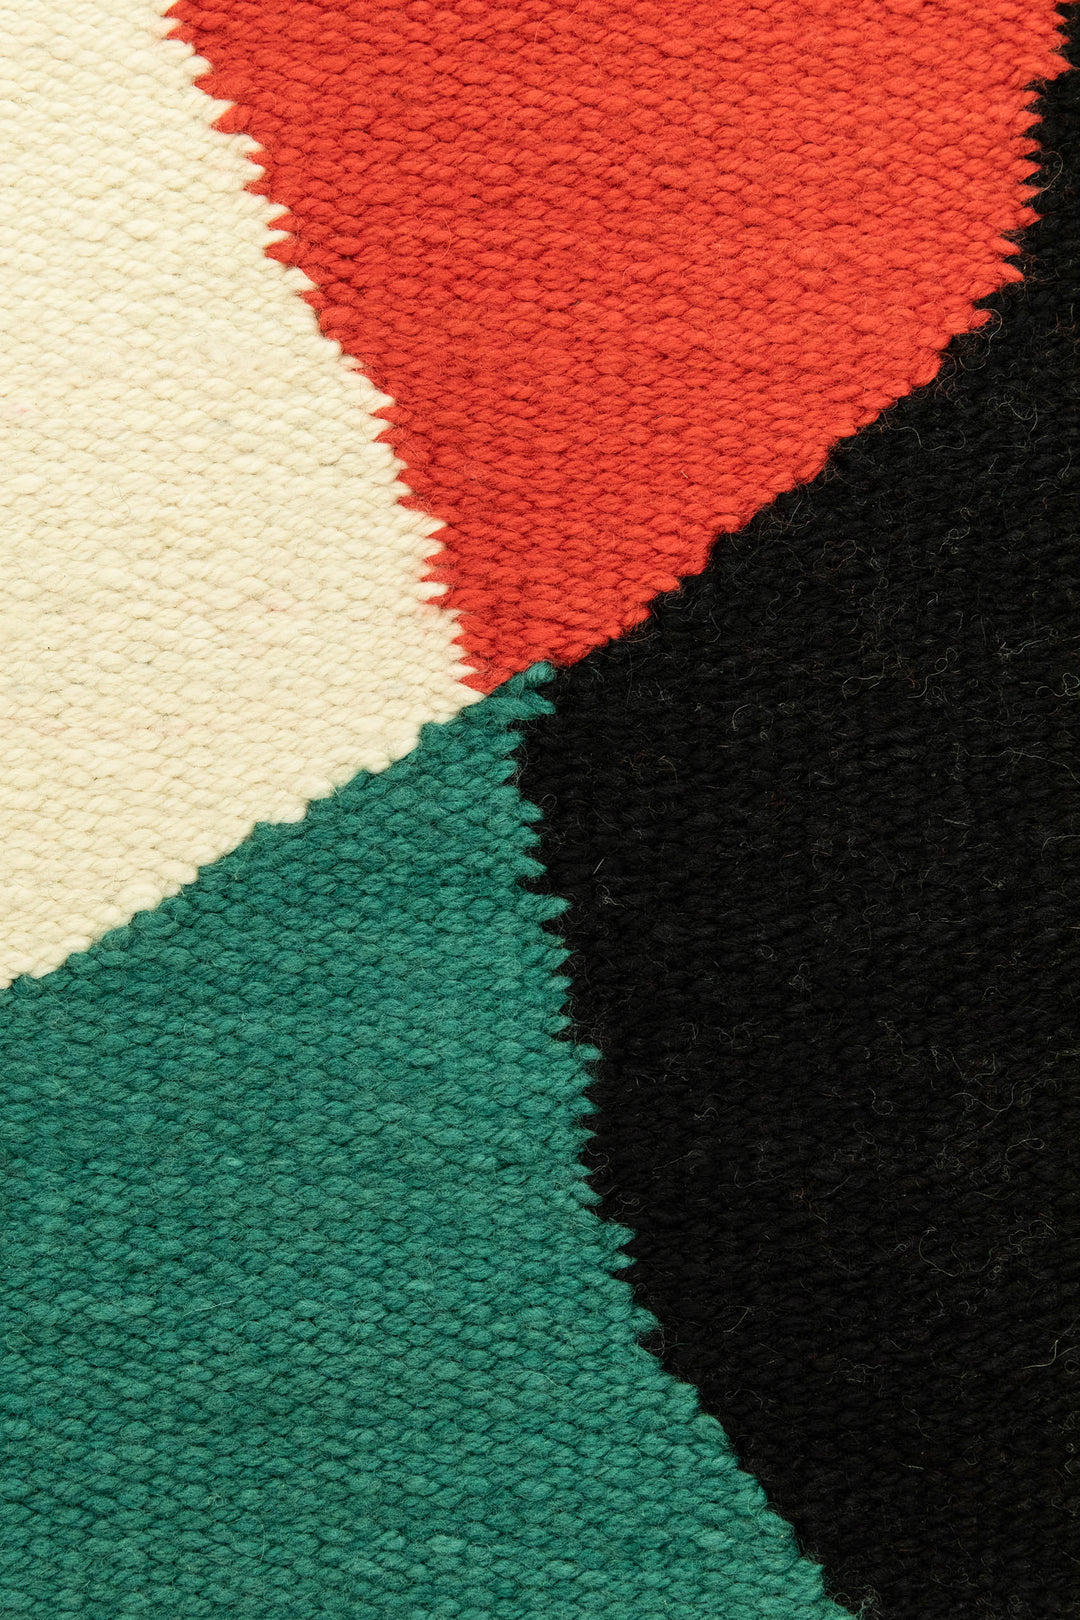 Hand Matters. Handcrafted Rug Colors